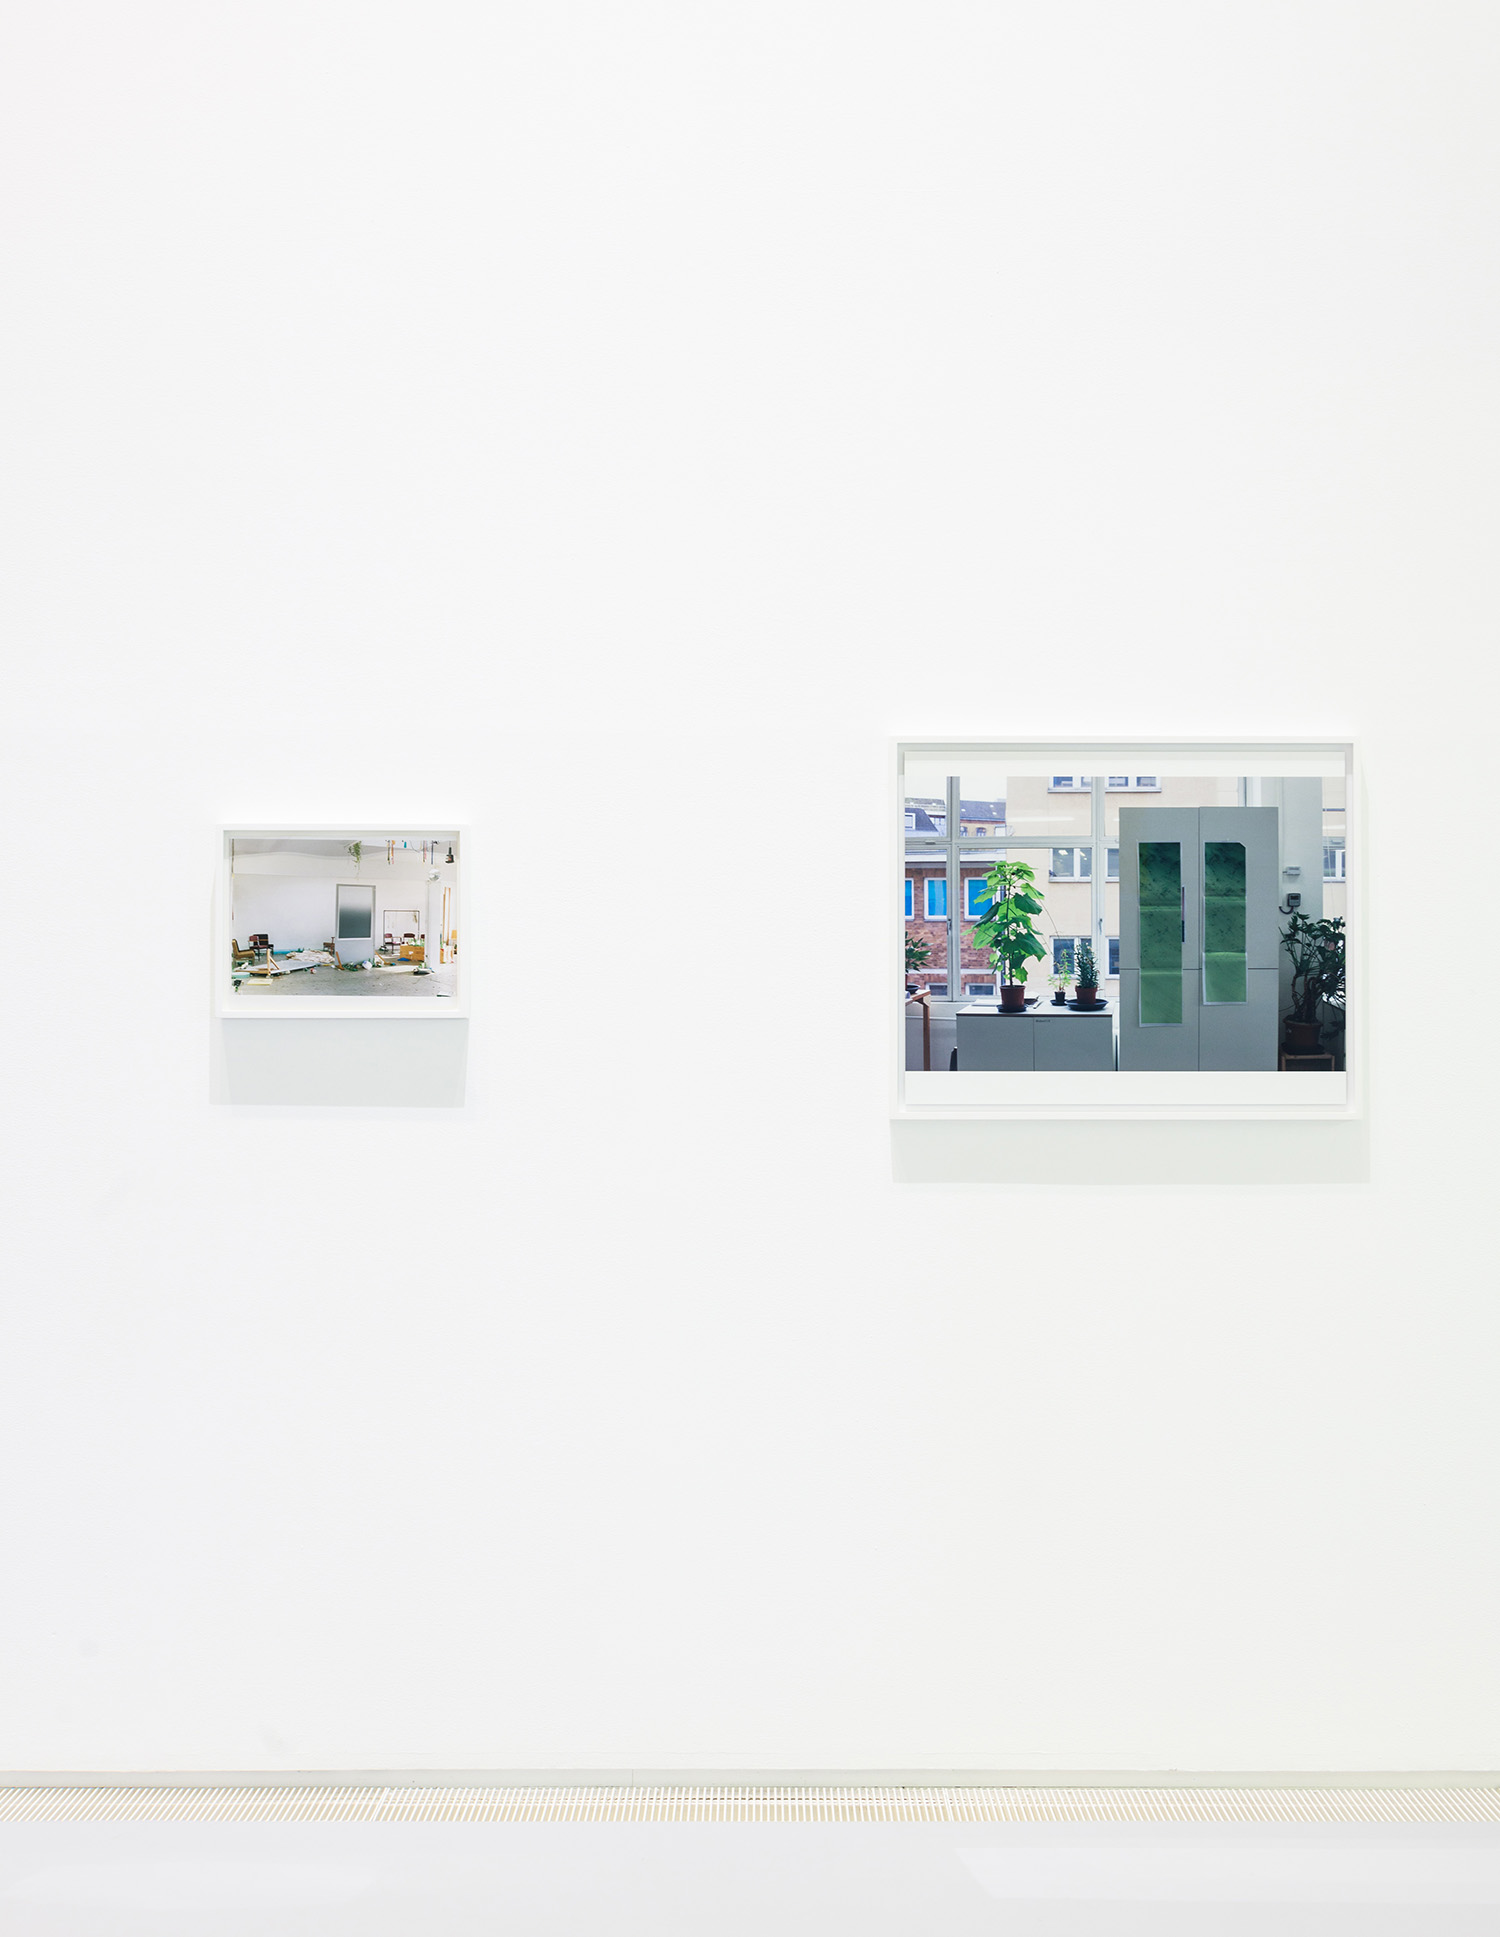 WOLFGANG TILLMANS EXHIBITION “MOMENTS OF LIFE” | SWAG HOMMES